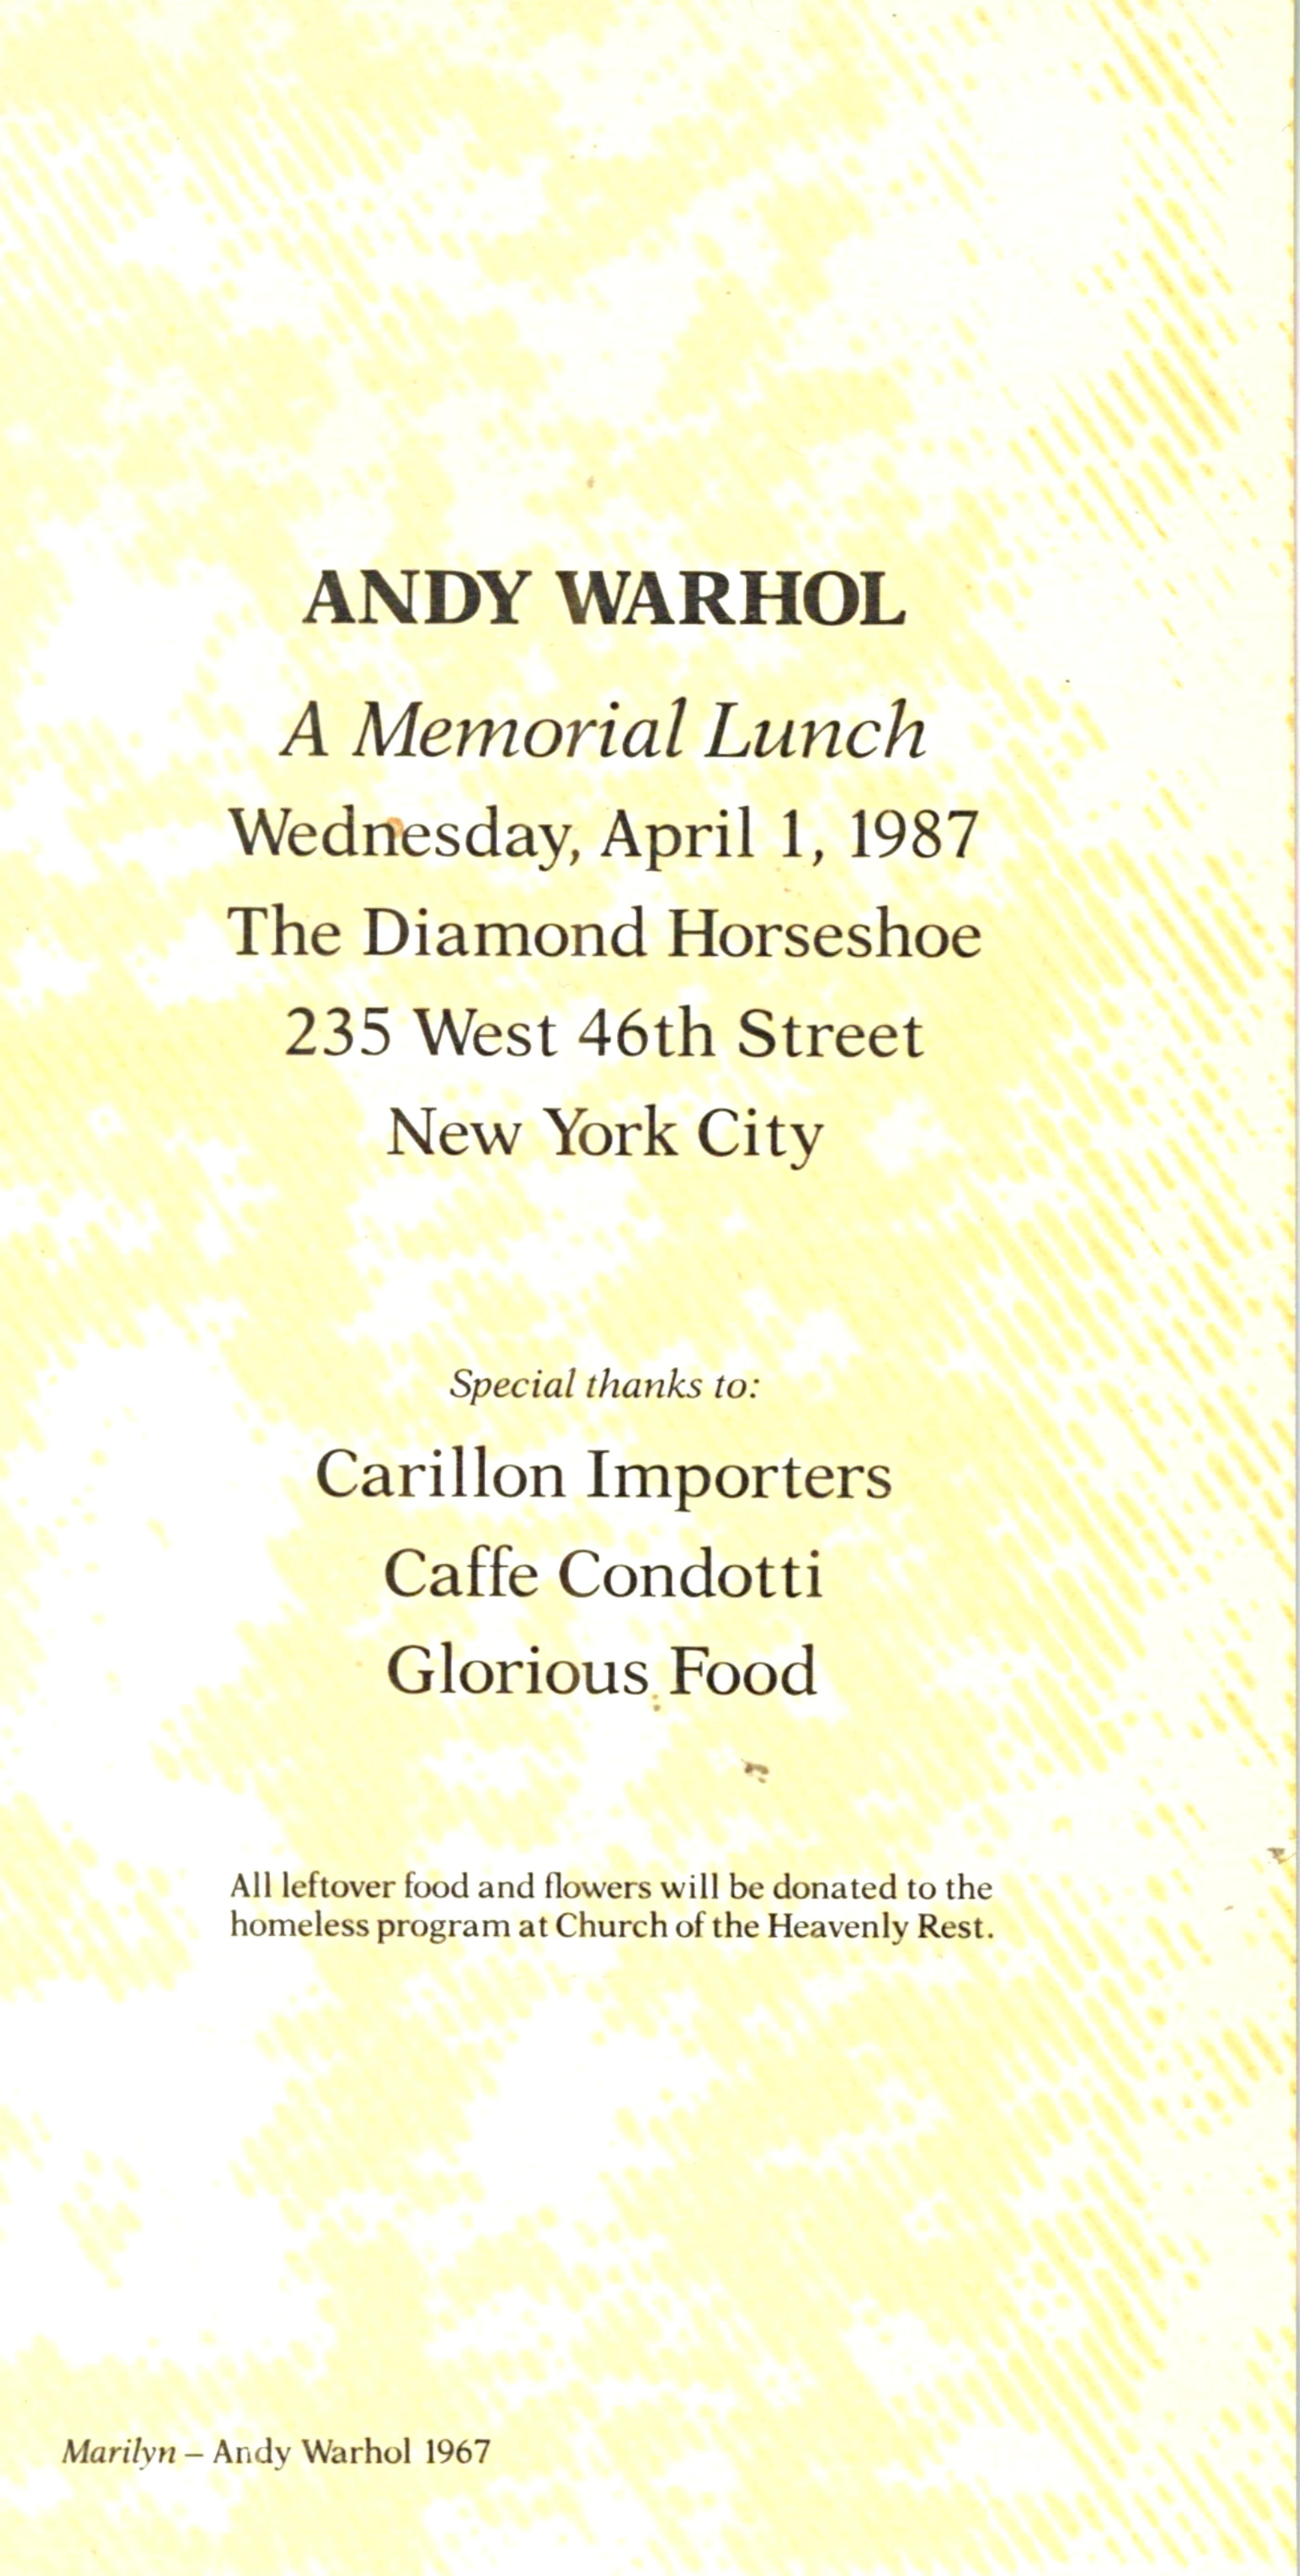 Andy Warhol
Invitation Card to Andy Warhol Memorial Lunch, from the Estate of Tim Hunt, 1987
Offset lithograph card
6 1/2 × 3 3/5 inches
Unframed
This invitation to the private memorial lunch for Andy Warhol is an historic collectors item. Few